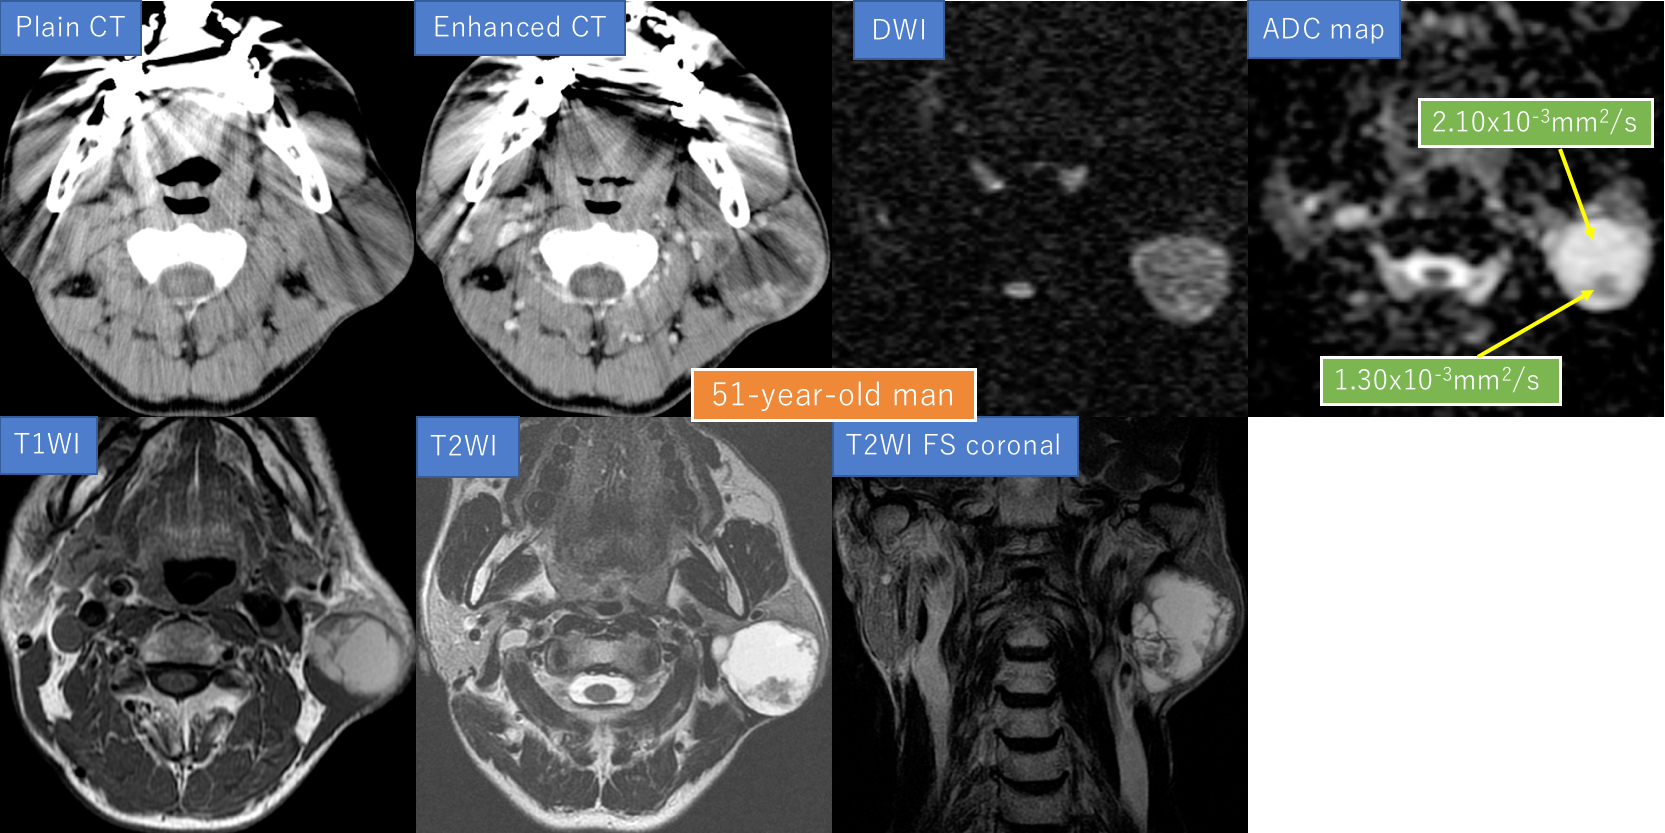 51-year-old man with left parotid gland tumor1